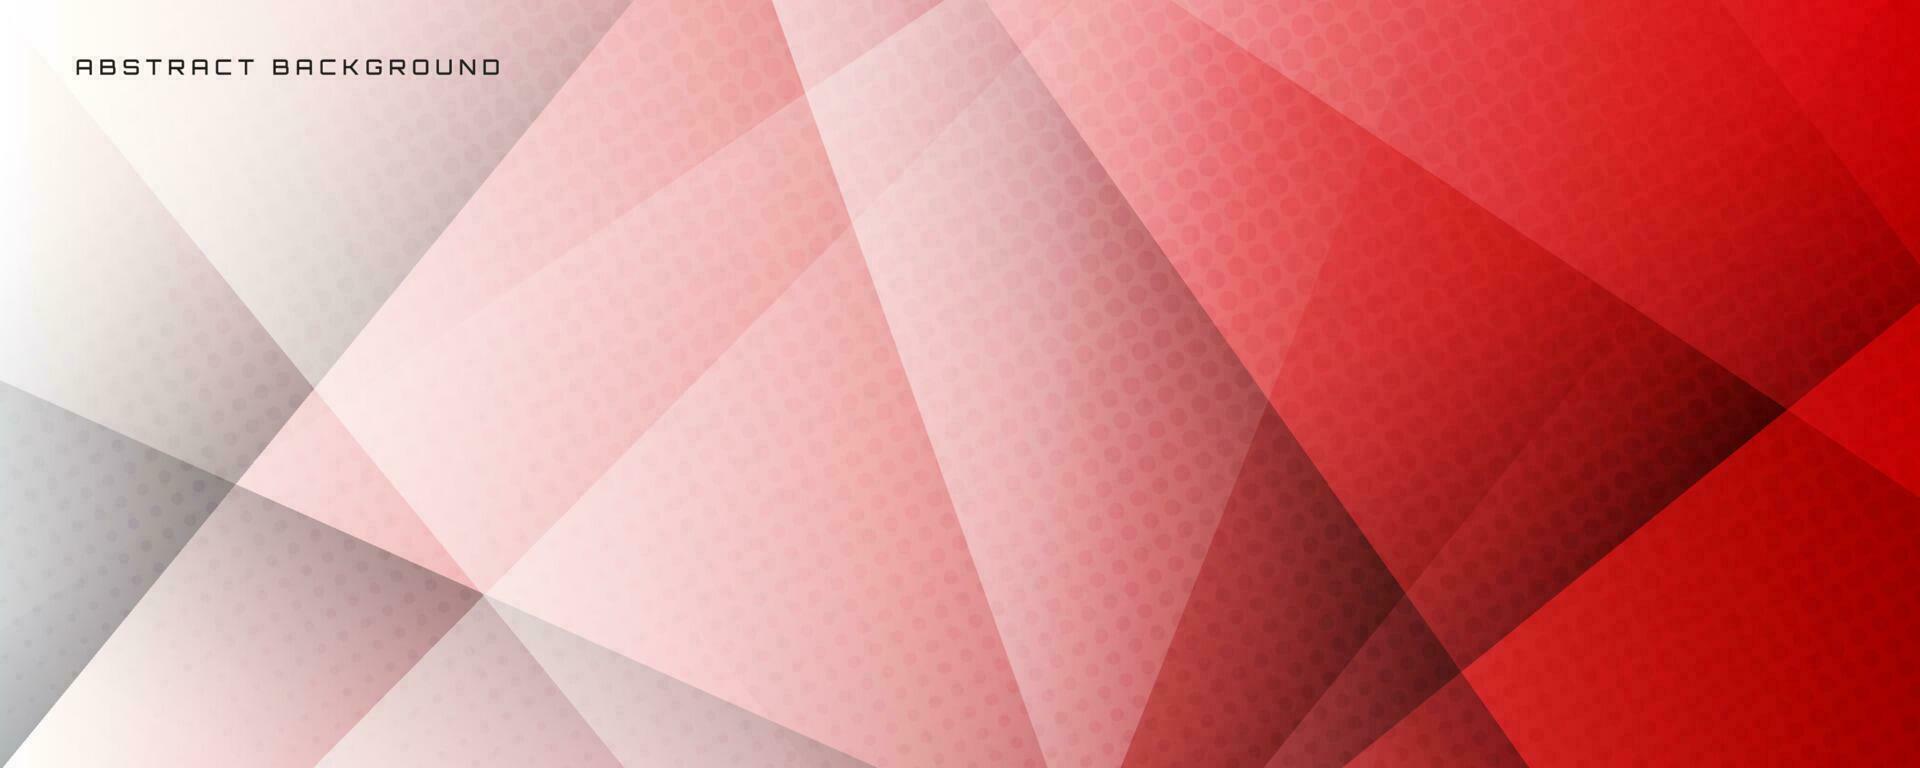 3D red white geometric abstract background overlap layer on bright space with halftone decoration. Simple graphic design element cutout effect style concept for banner, flyer, card, or brochure cover vector